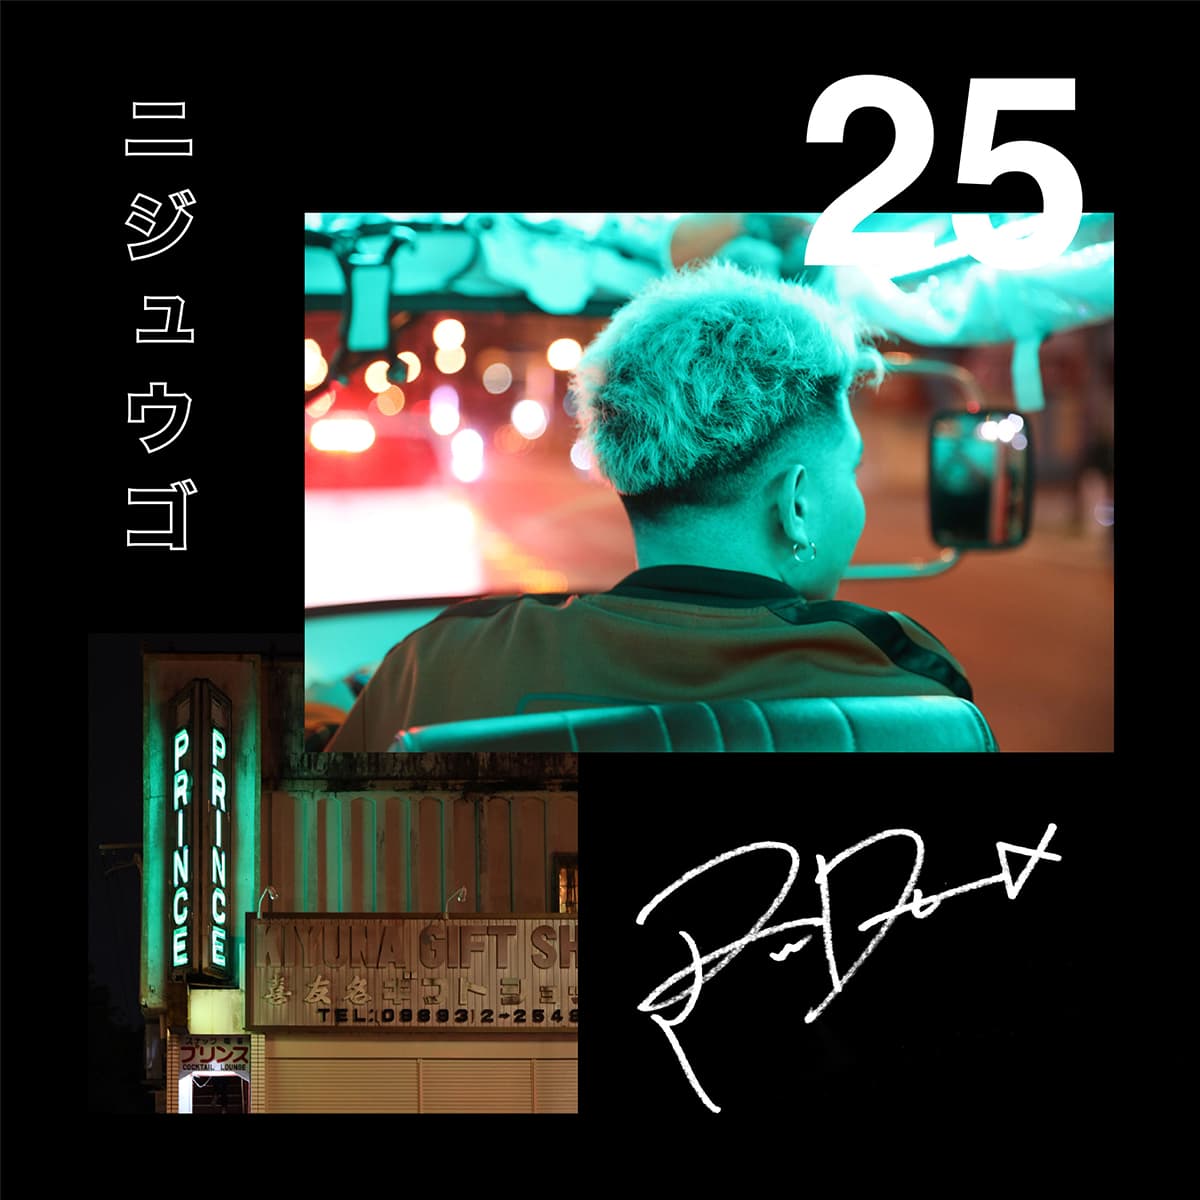 "25", the lead single for the release of Rude-α's latest album, has been released today. A new axis that challenges sounds reminiscent of Alternative Rock to indie rock!